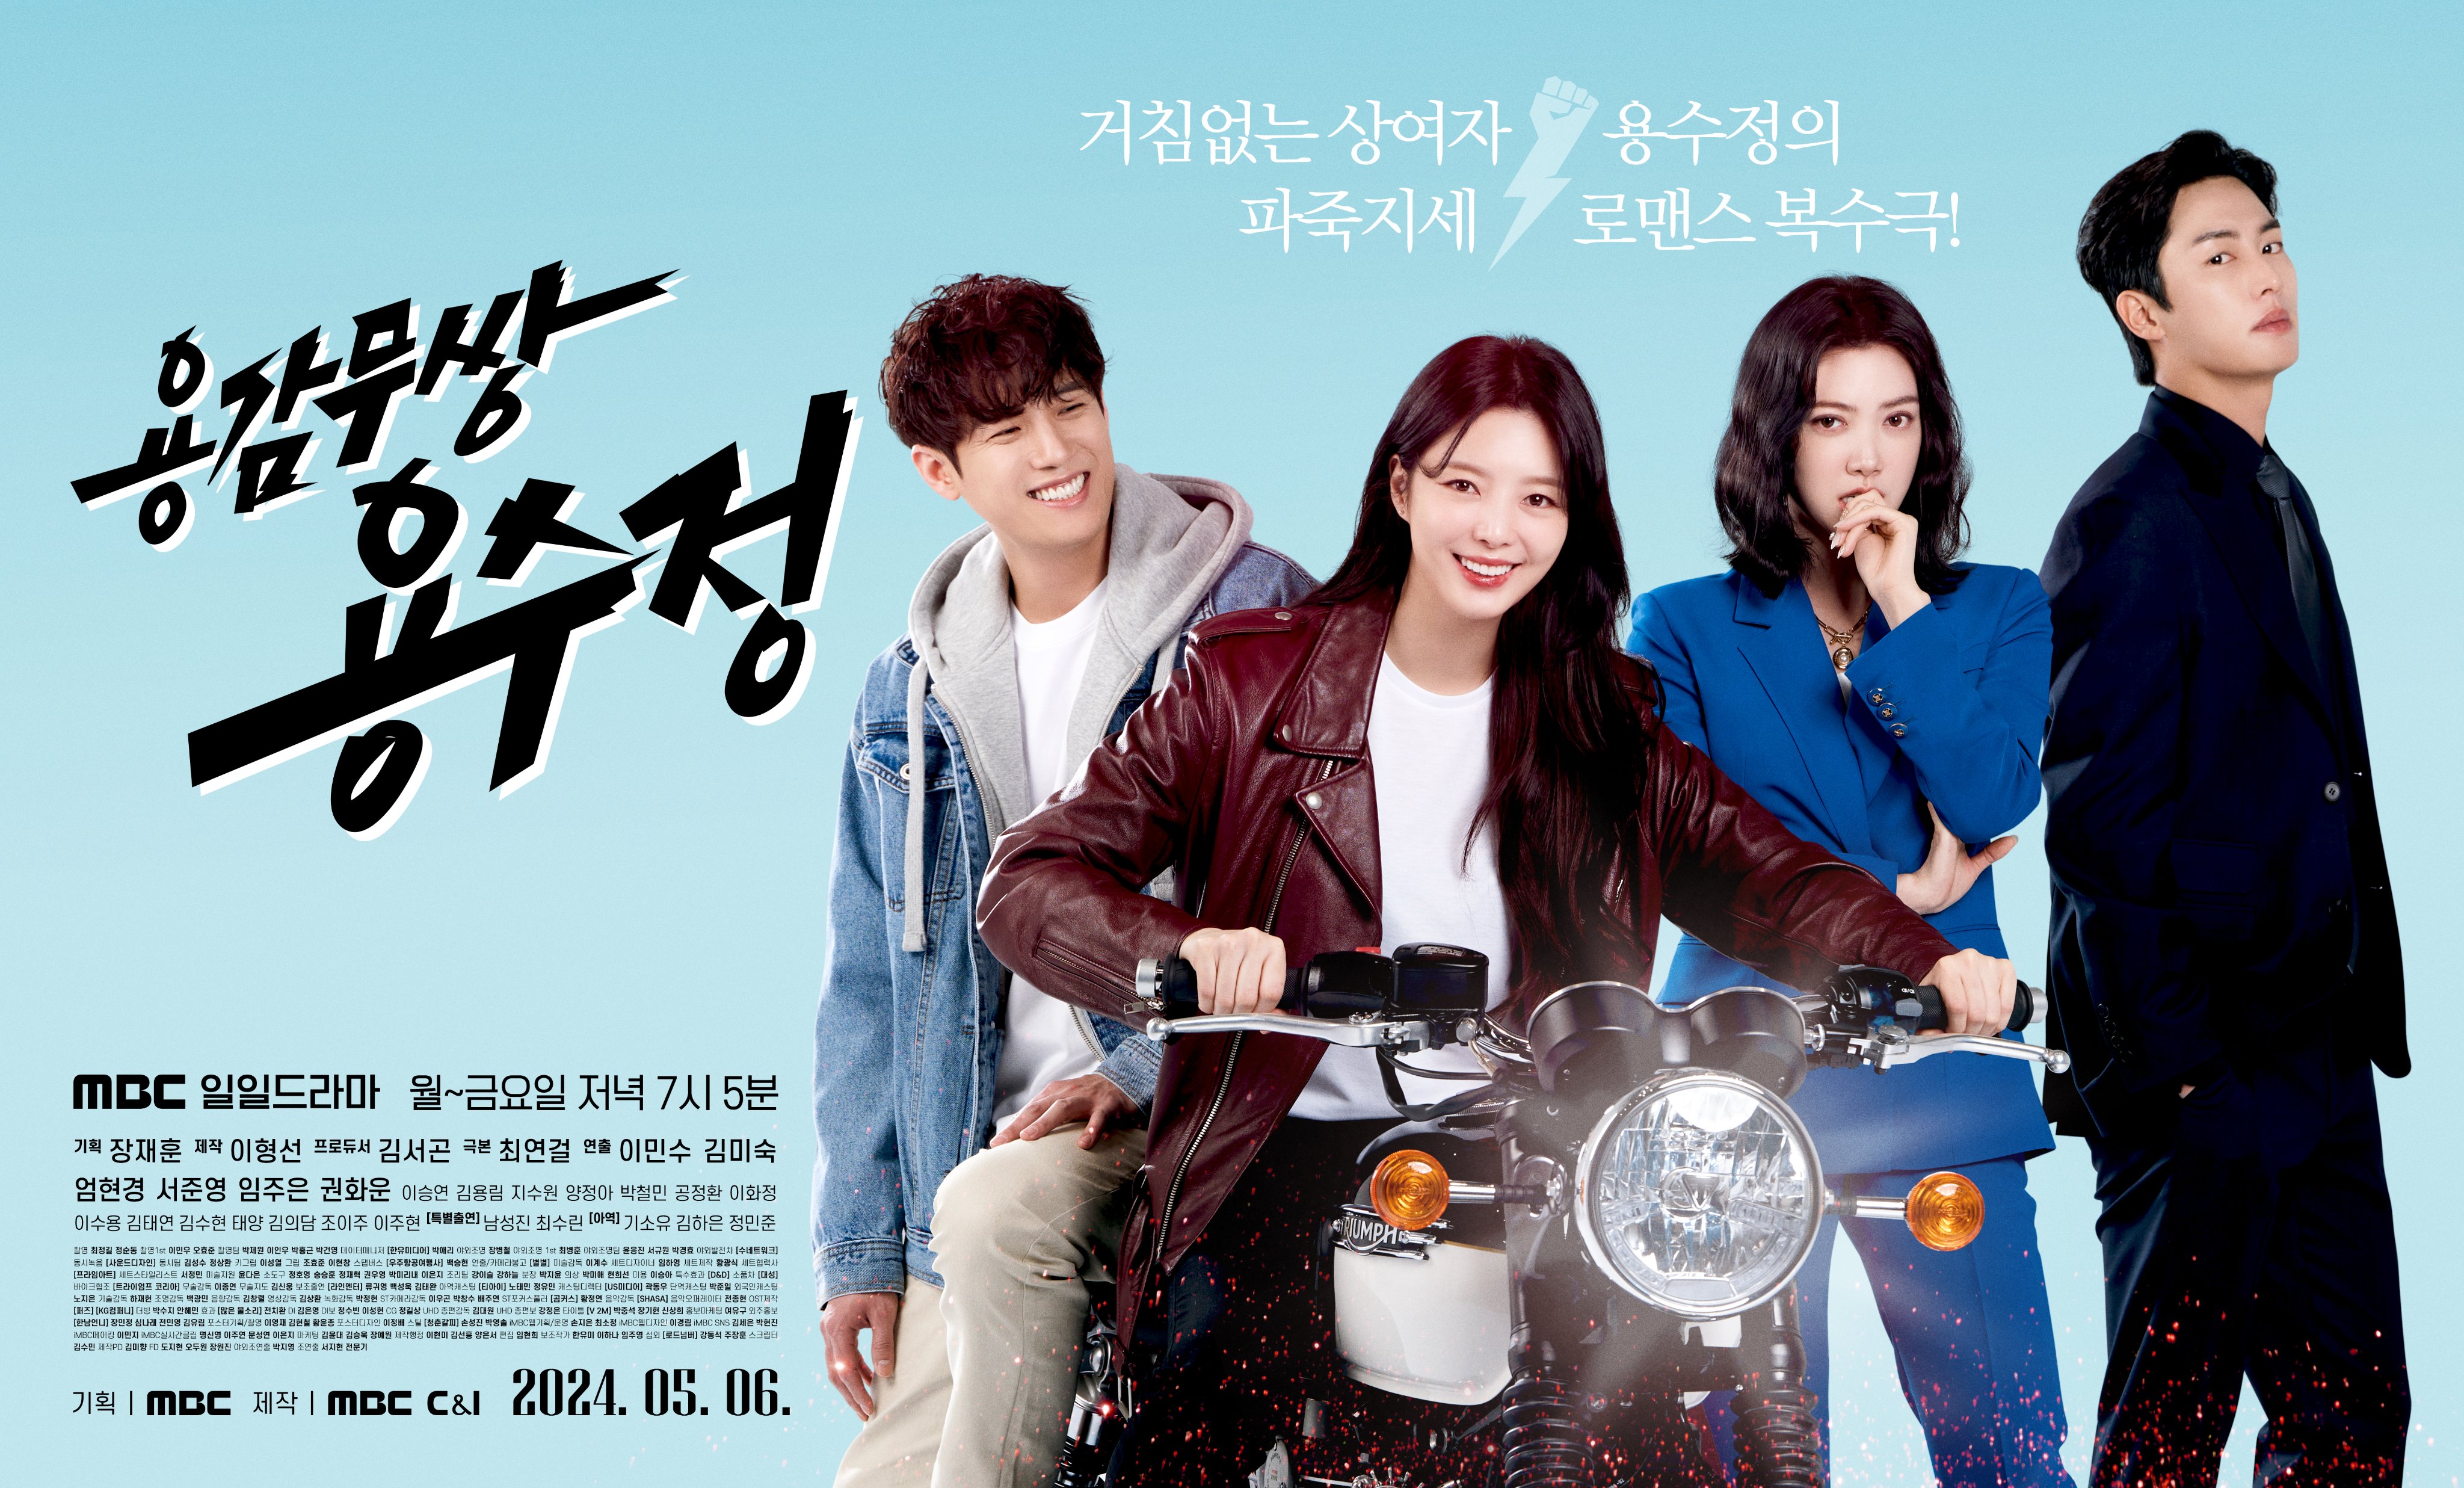 Uhm Hyun Kyung And Seo Jun Young Flash Bright Smiles Contrasting With Kwon Hwa Woon And Im Joo Eun In New Romance Drama Poster